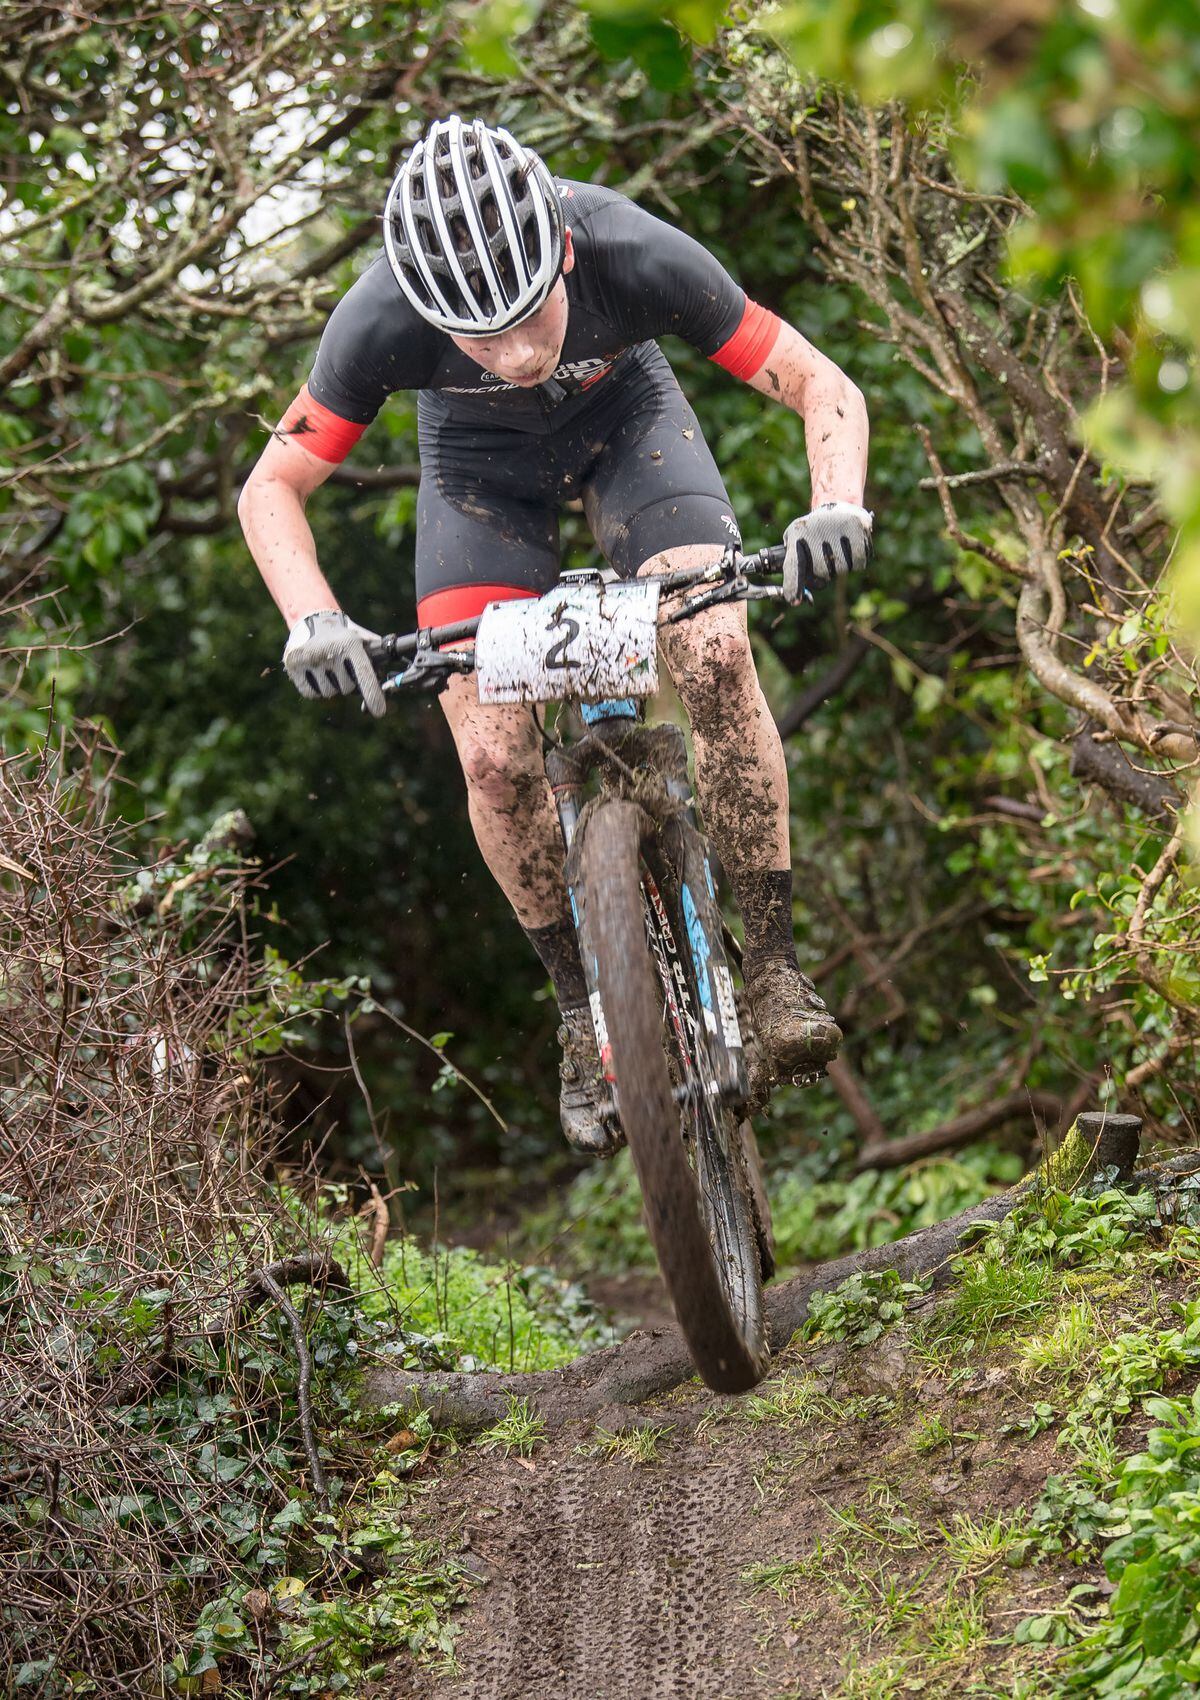 Mountain biking is a love of Culverwell's but it will be a secondary consideration for the time being. (Picture supplied by Andrew Le Poidevin, 20435315)